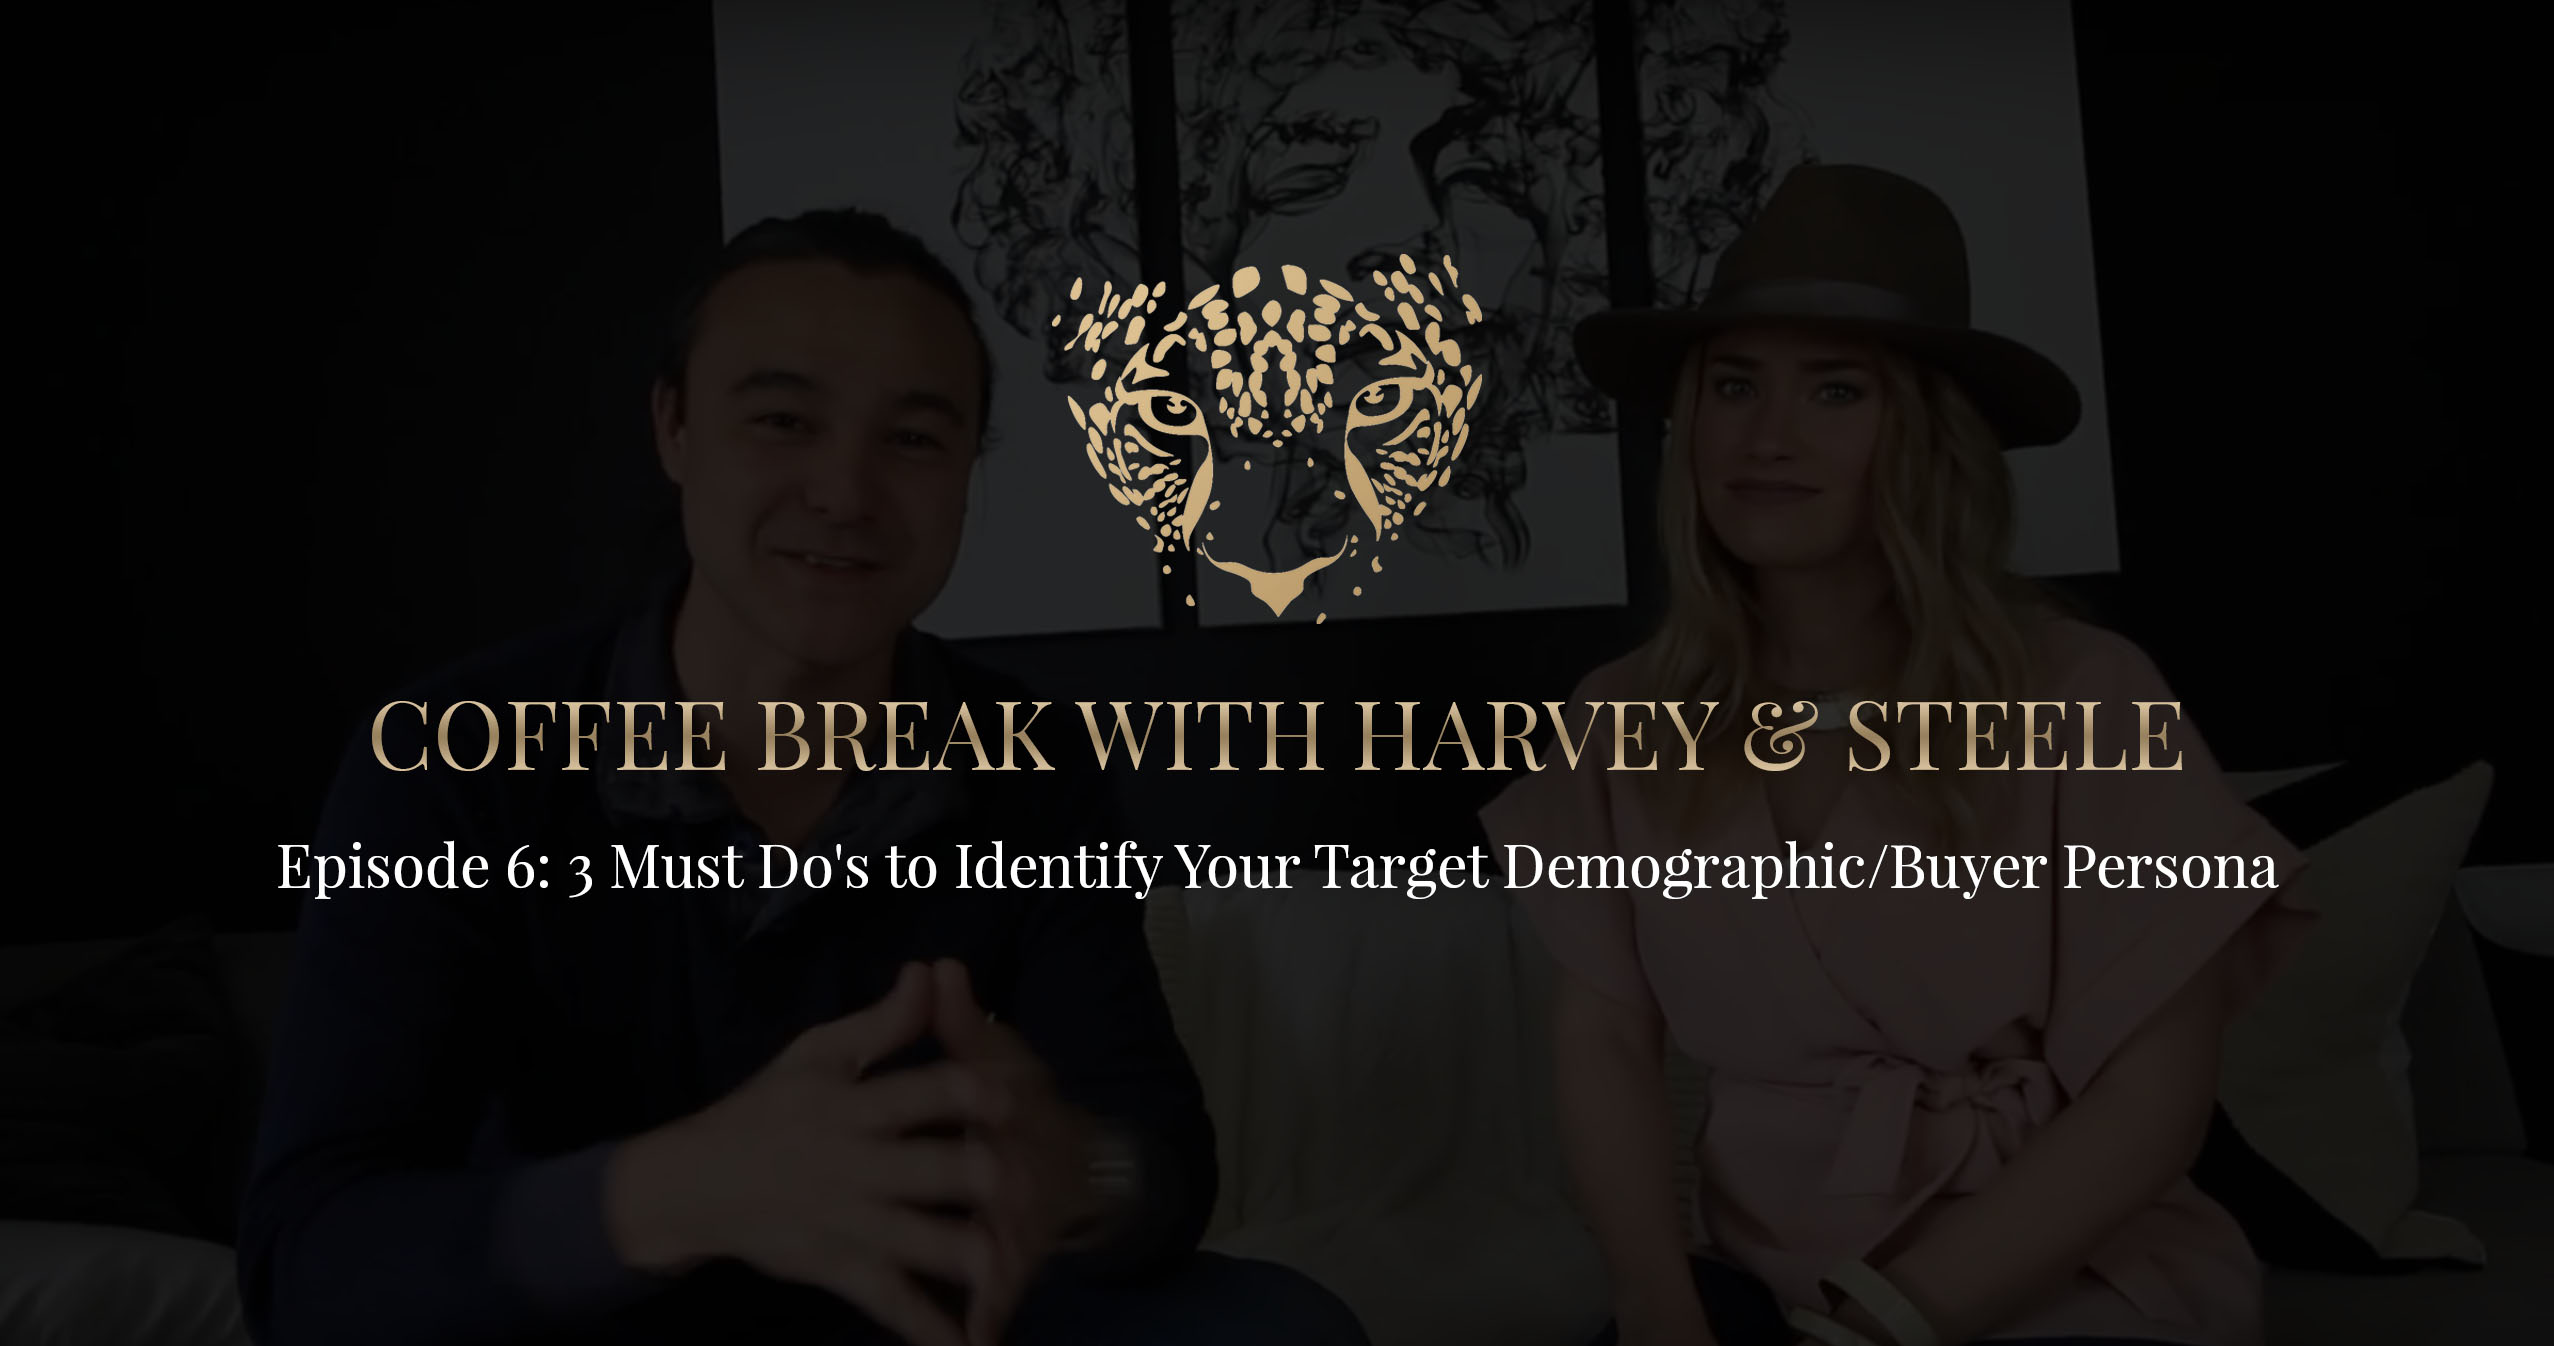 3 Must Do's to Identify Your Target Demographic/Buyer Persona